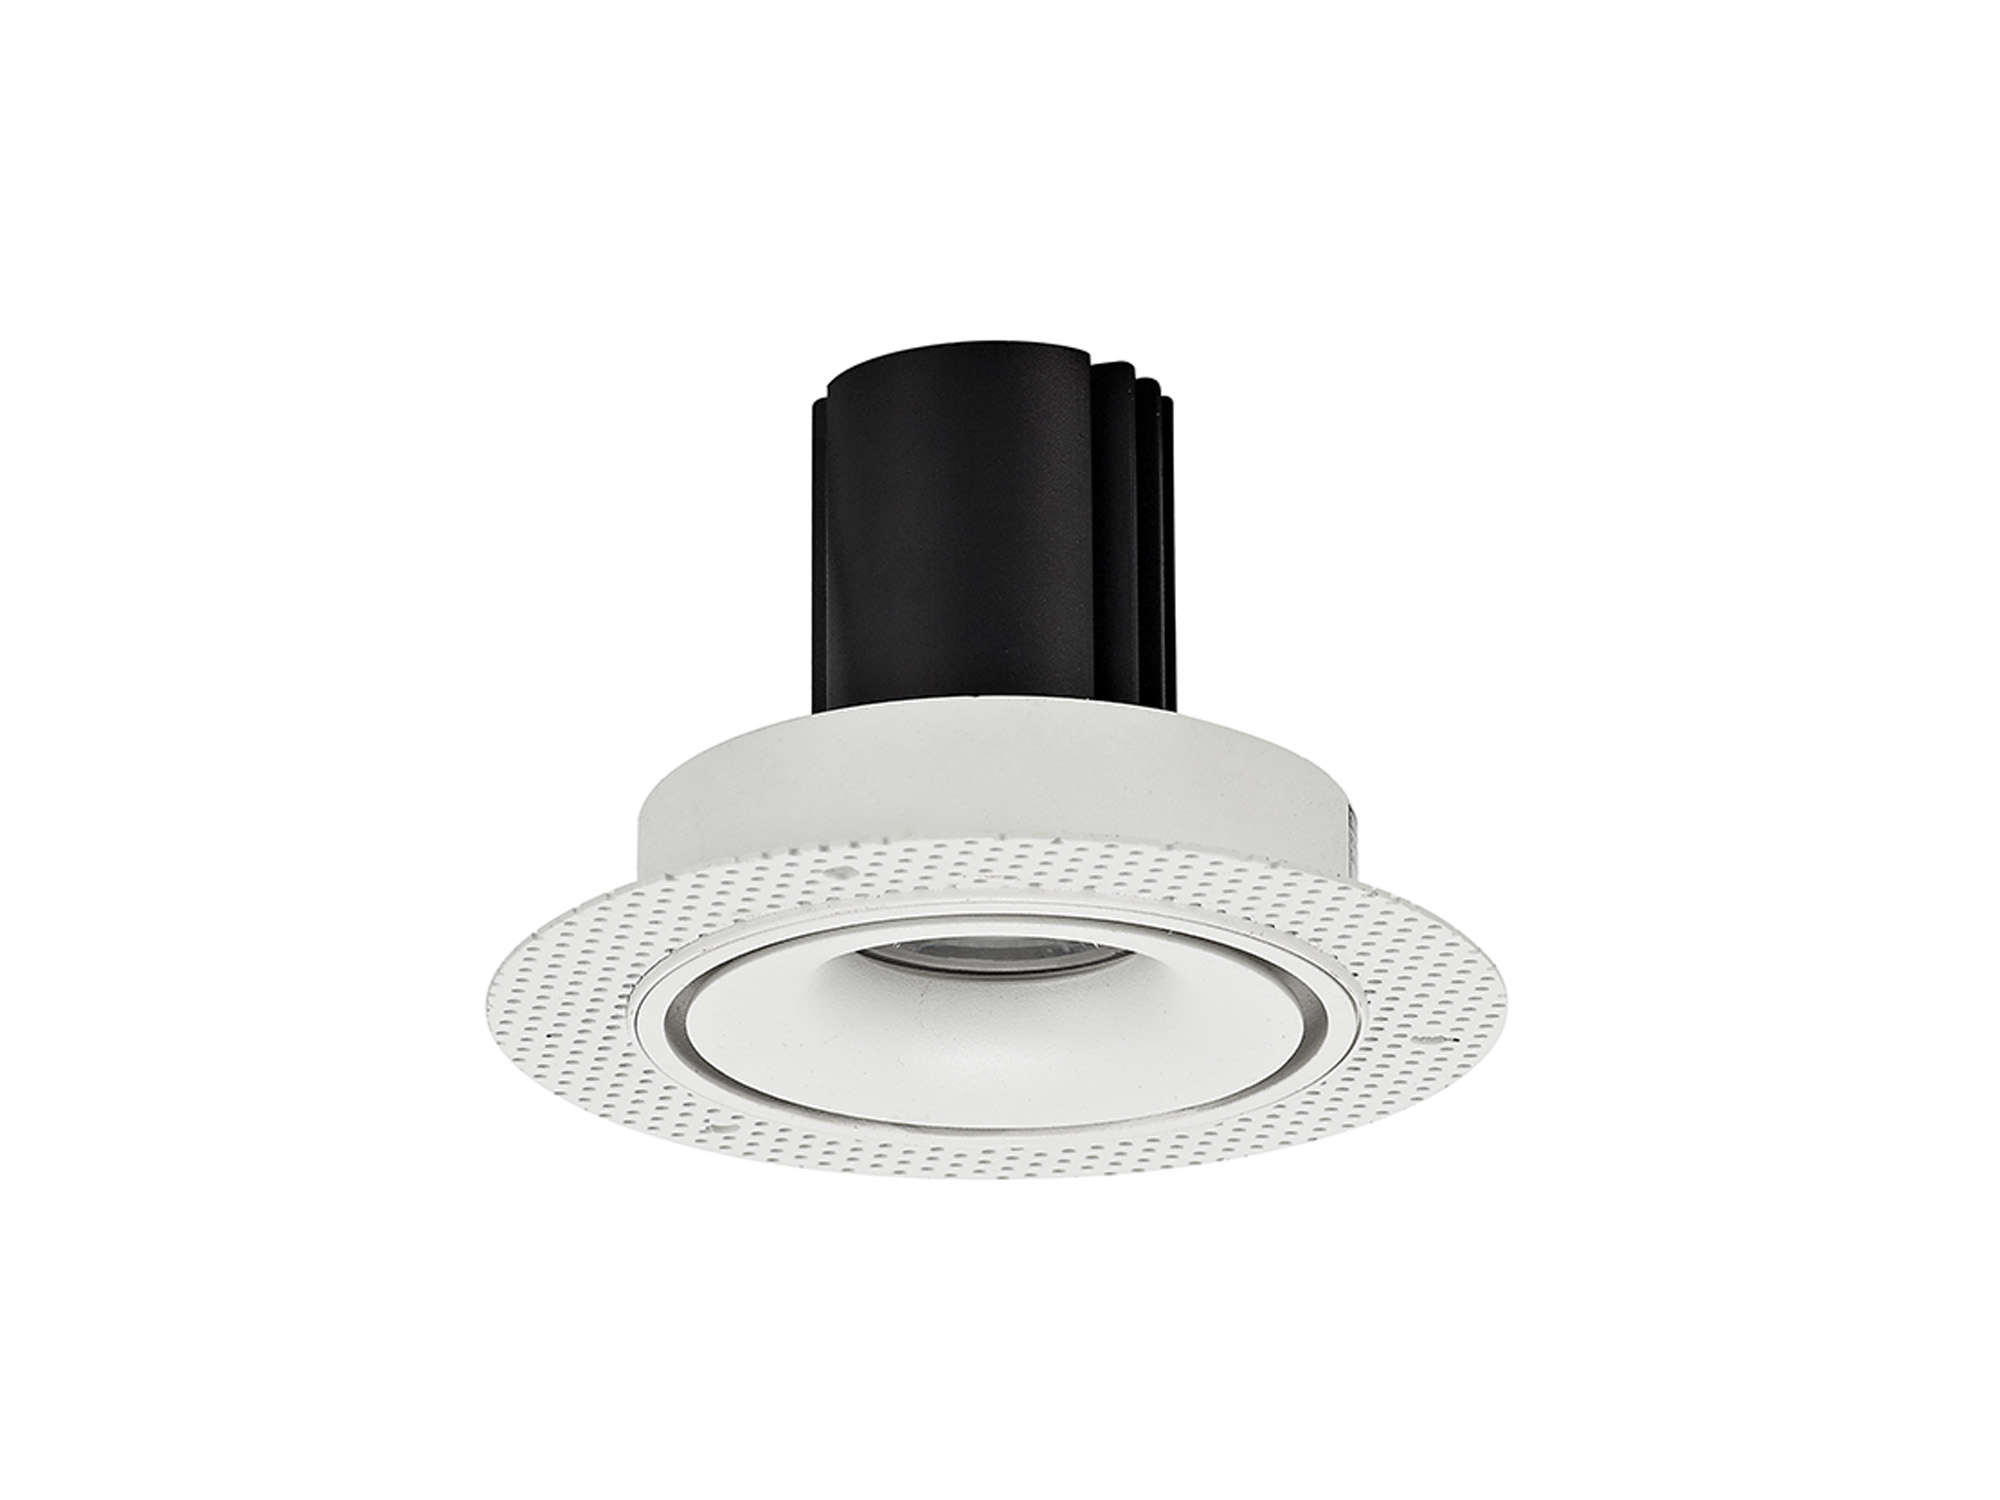 DM202162  Bolor T 12 Tridonic Powered 12W 2700K 1200lm 12° CRI>90 LED Engine White/White Trimless Fixed Recessed Spotlight; IP20